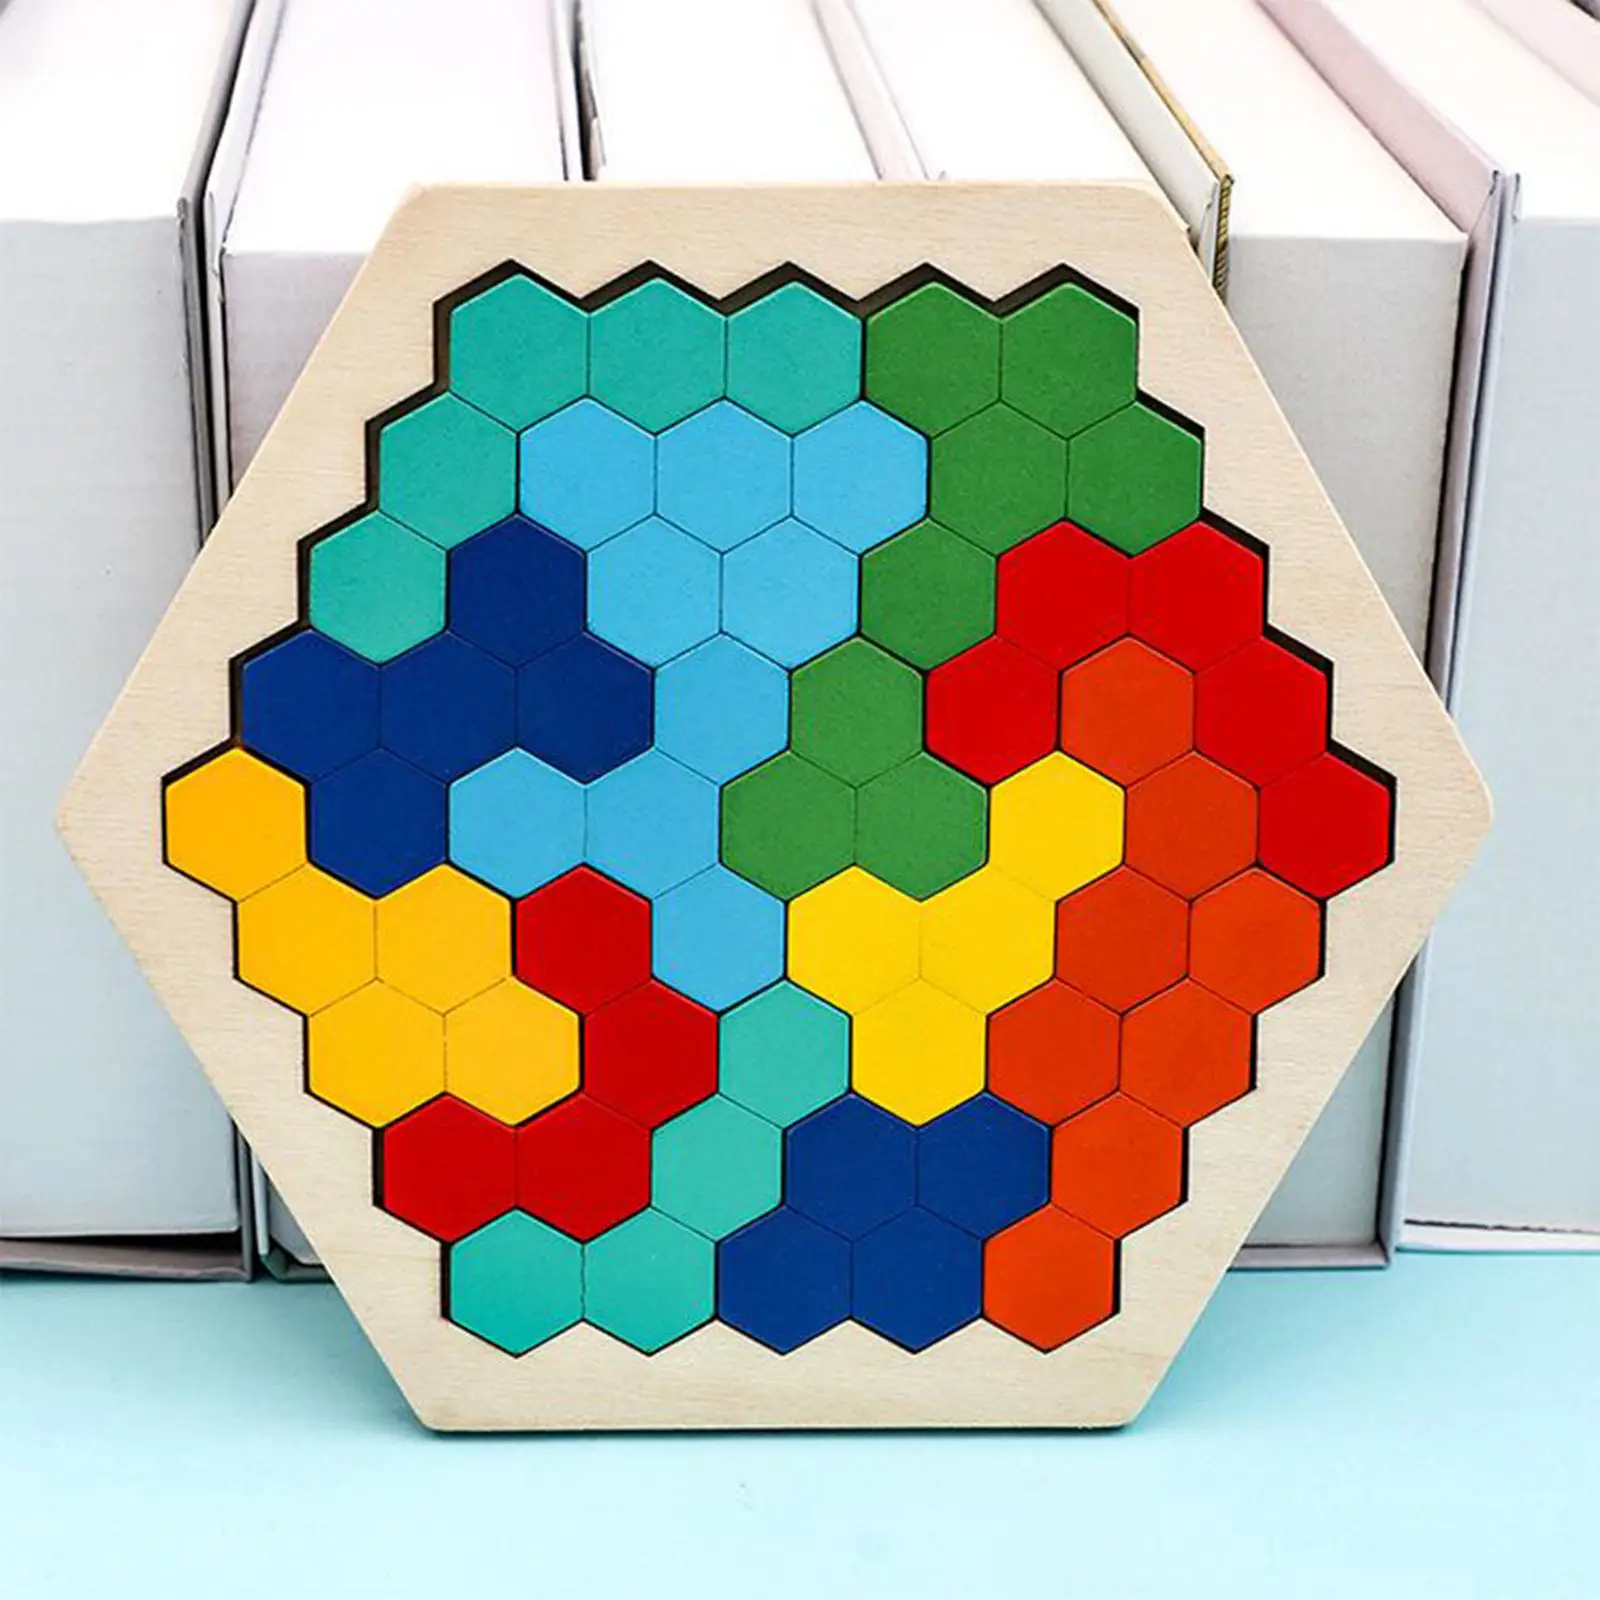 Wood Hexagon Tangram Puzzle Classic Handmade 3D Challenging Puzzles Brain Teasers Games Portable Play Educational Toys Gift